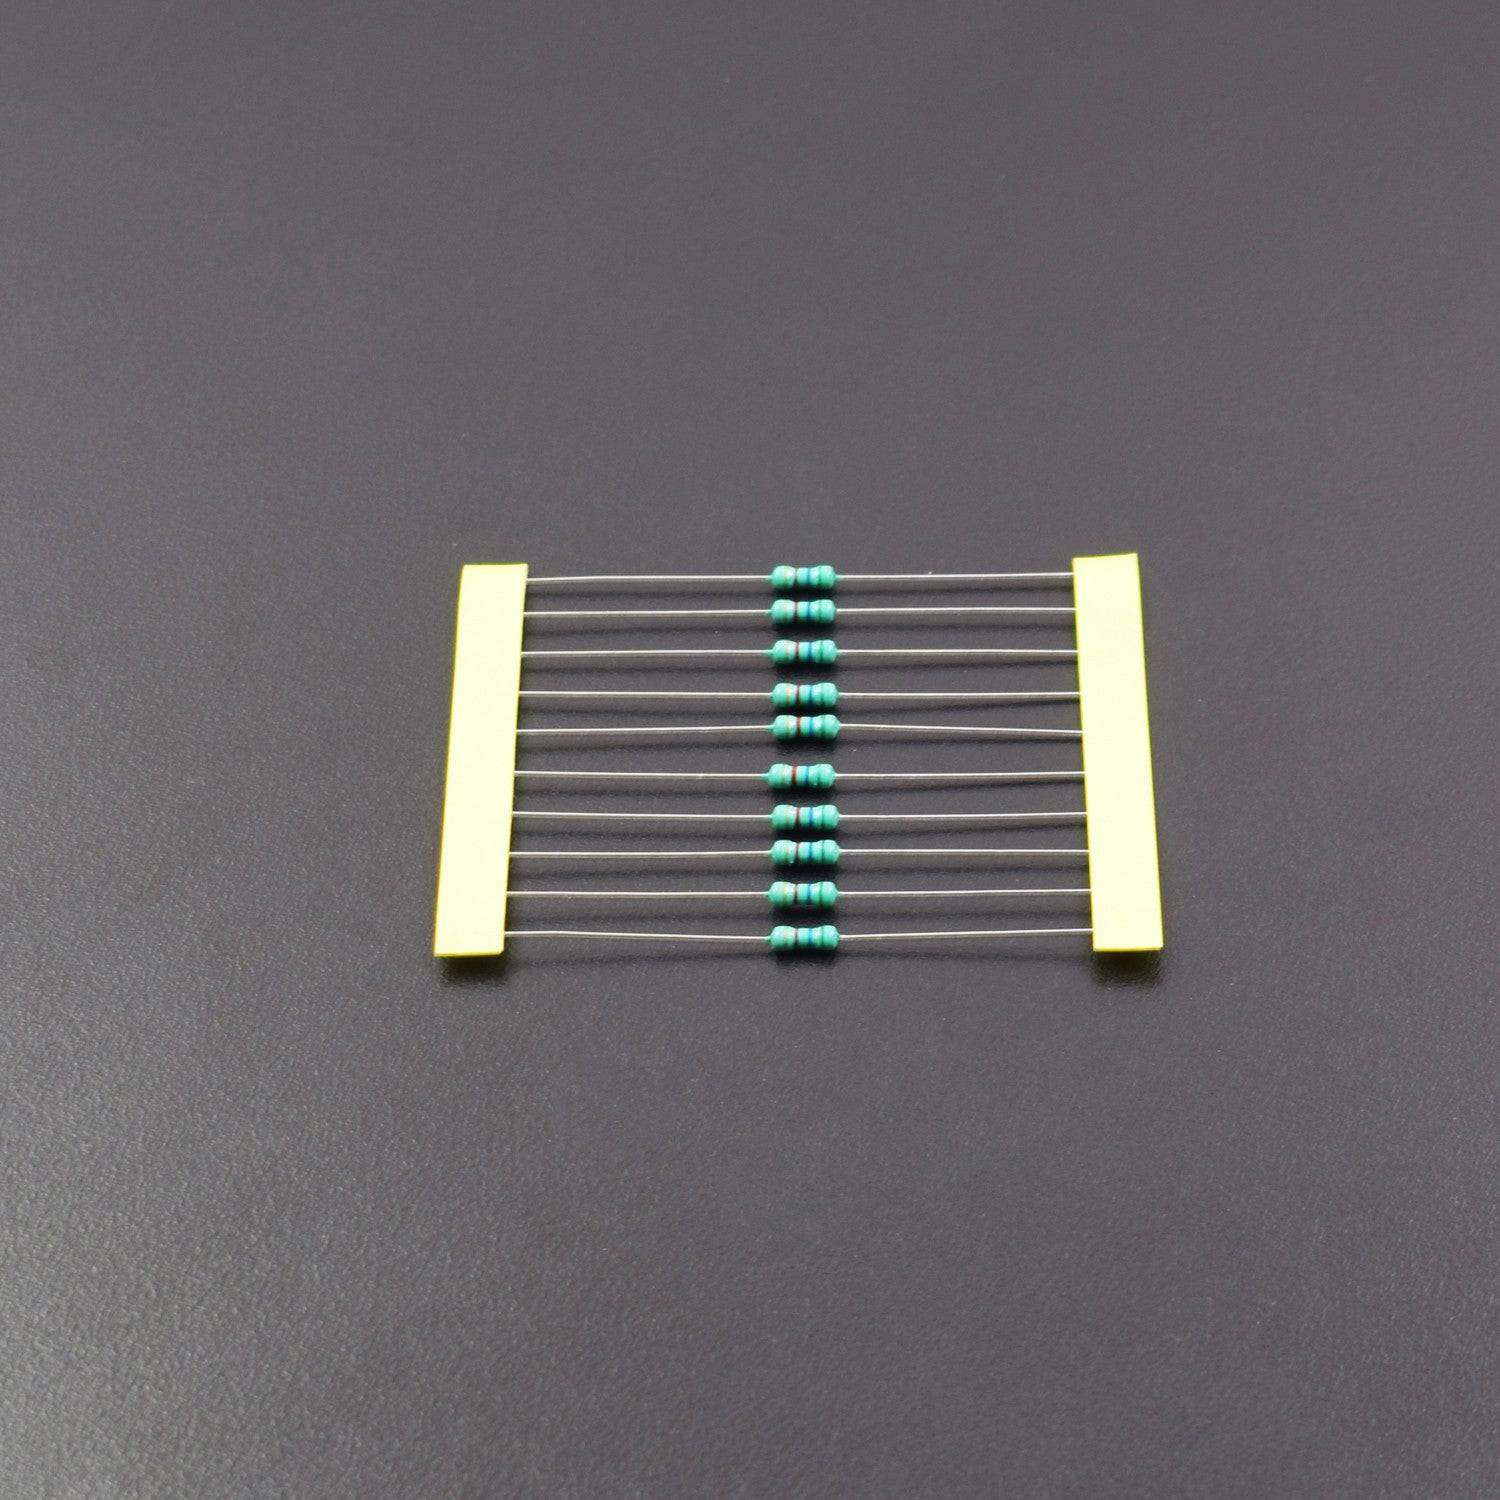 150 Ohm Resistance 1/4W Power Rating  5% Tolerance Carbon Film Resistor- RS623 - REES52